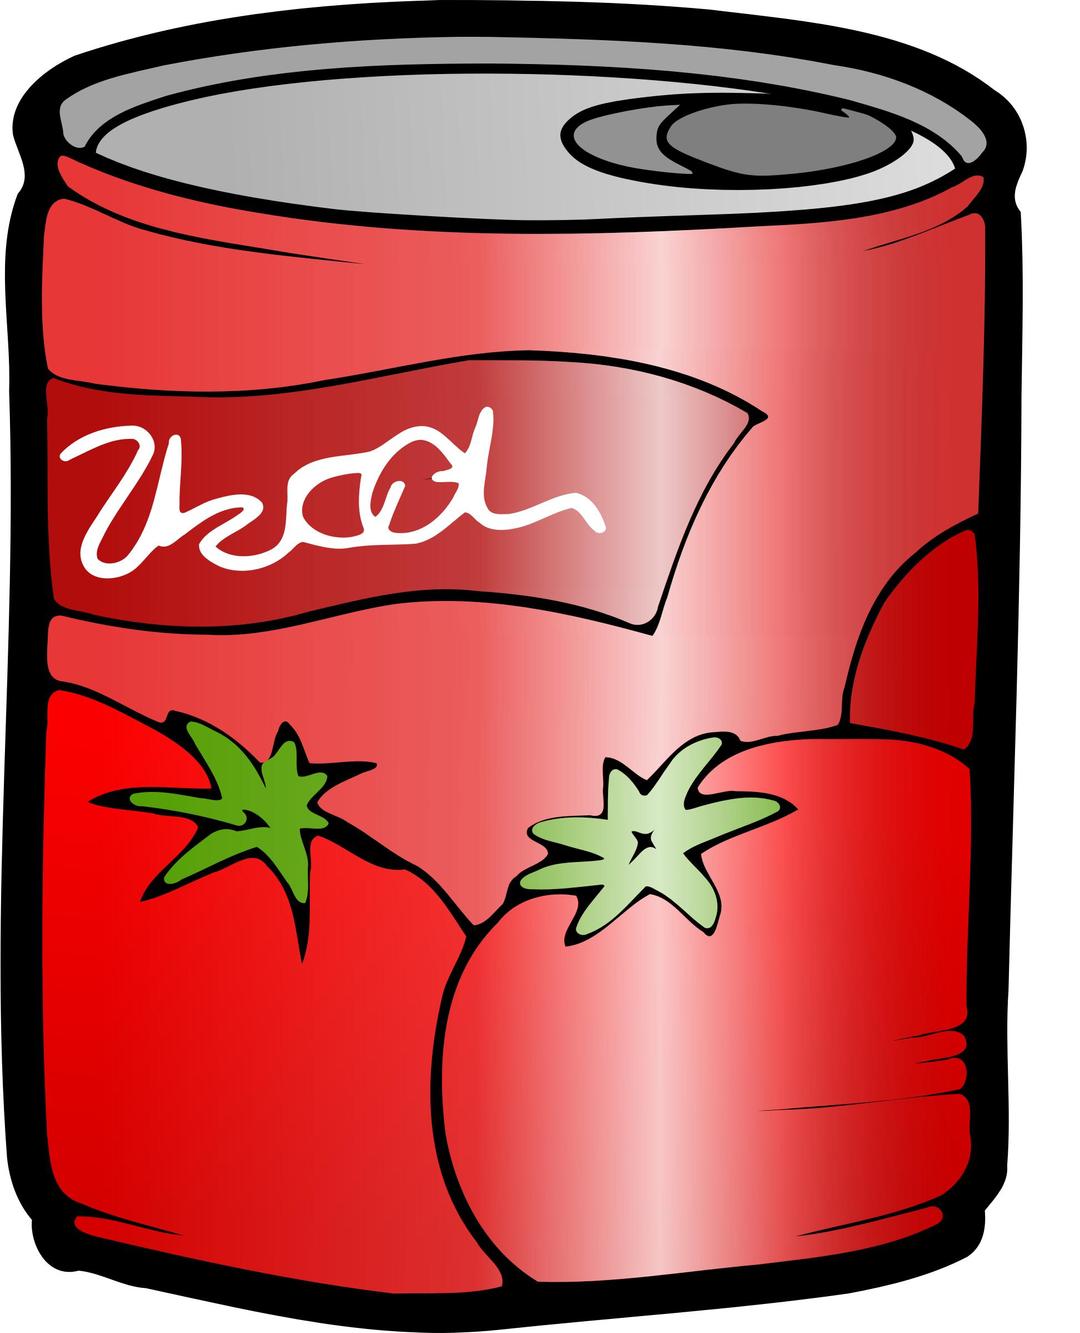 Can of Tomato Juice png transparent